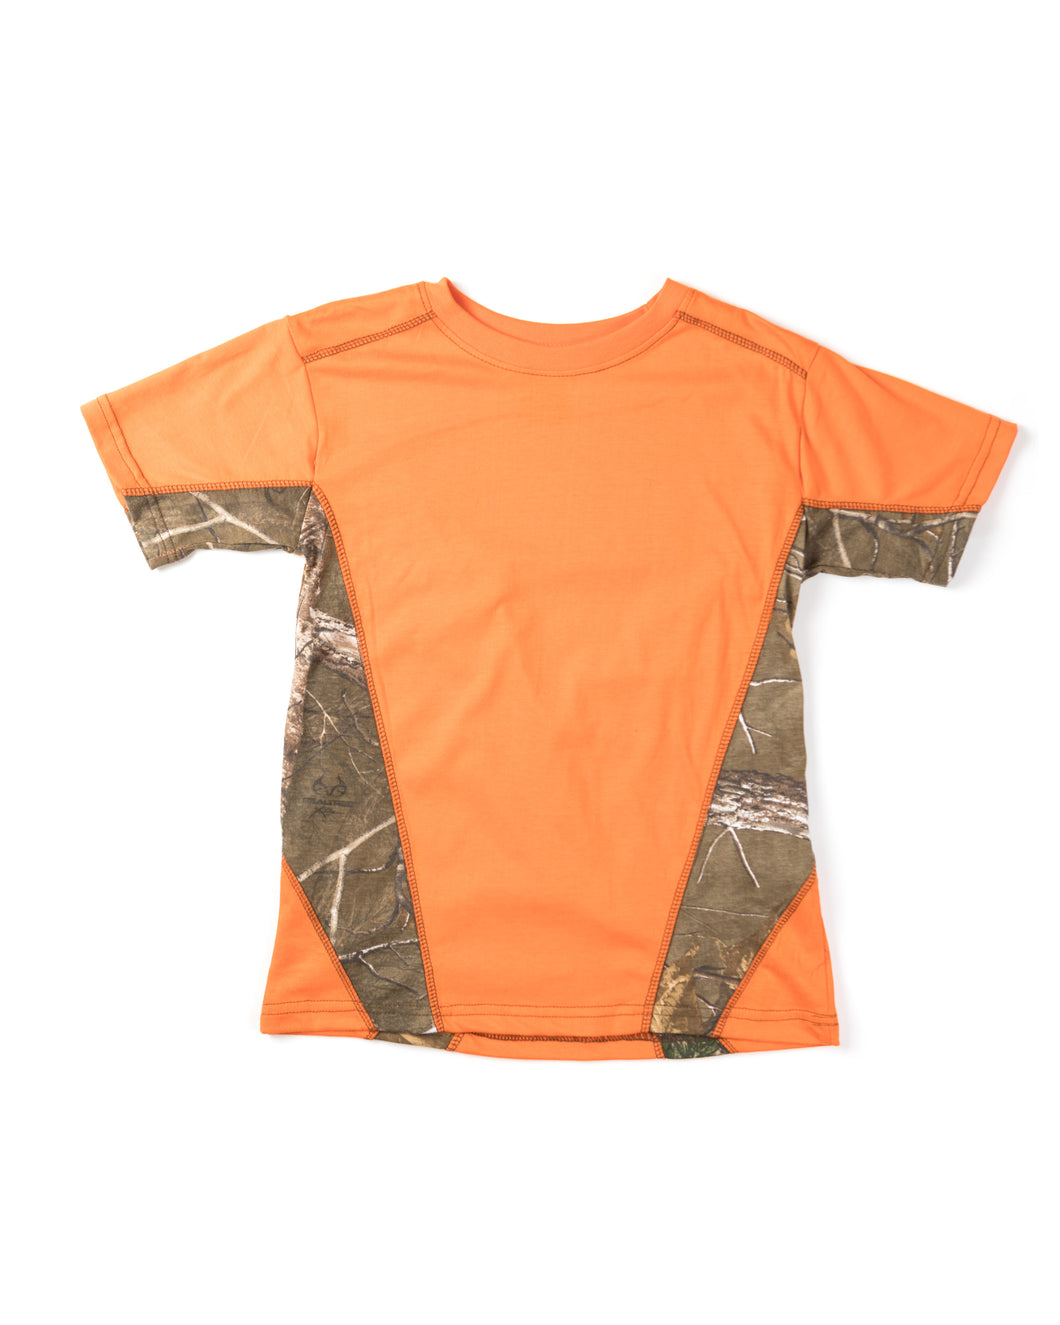 Toddler Athletic T-Shirt with Realtree Camo Accents